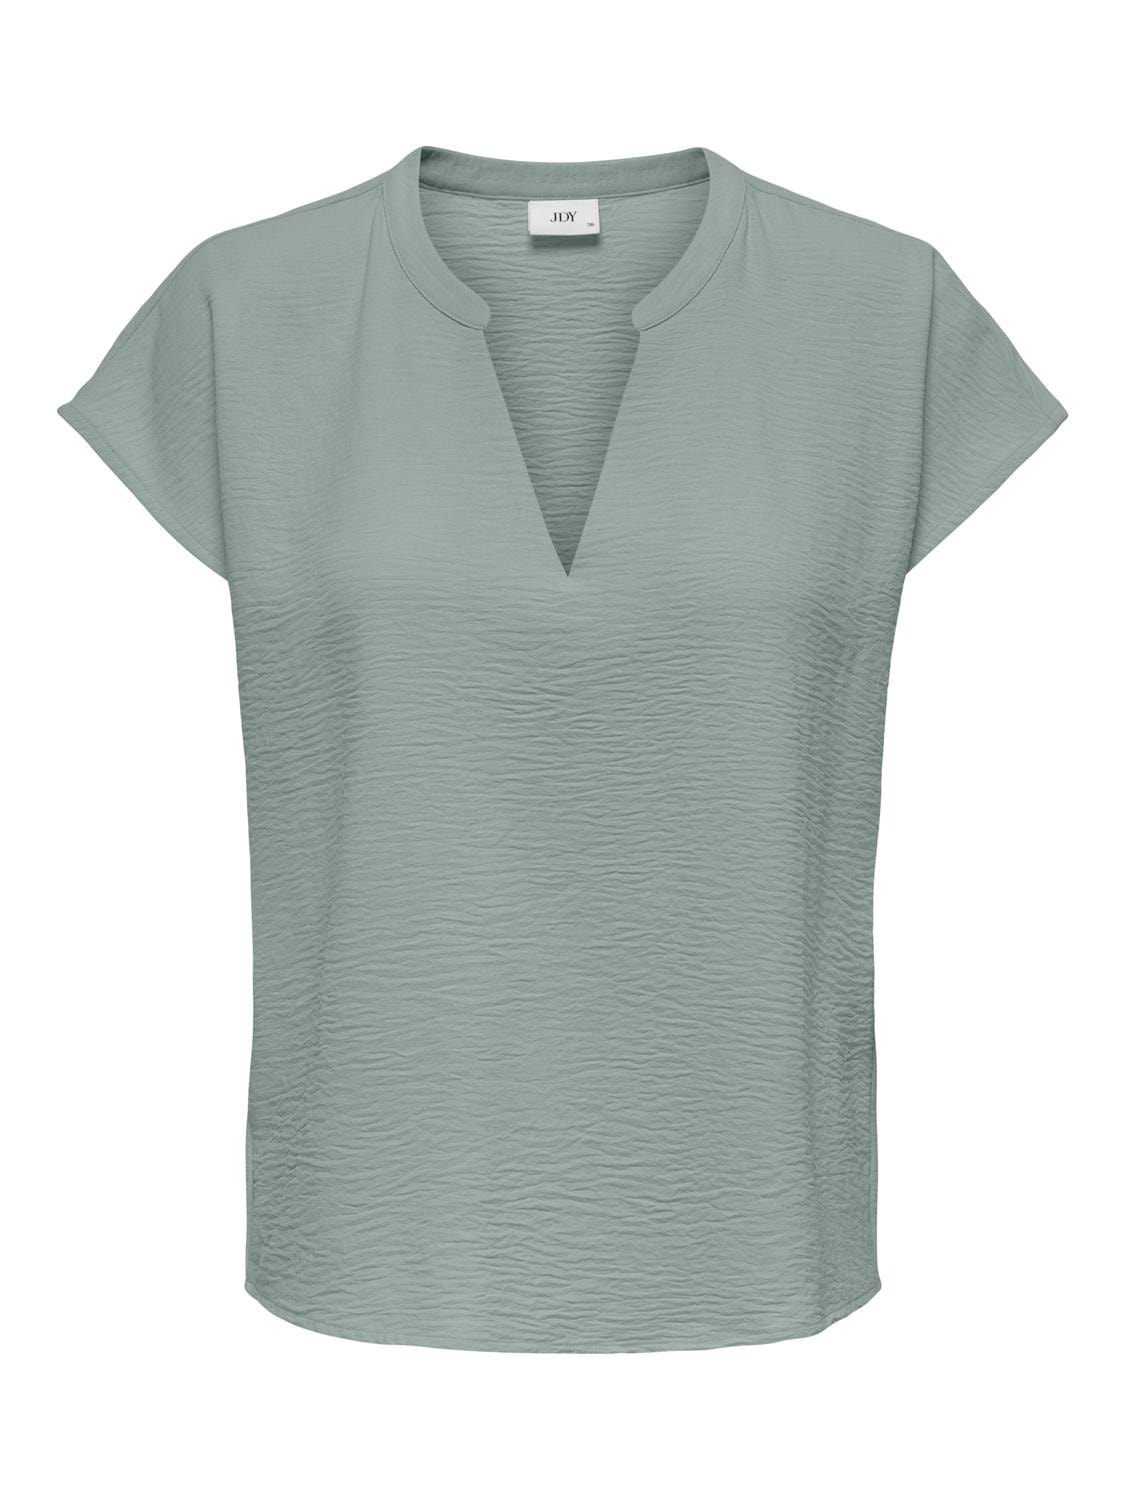 ONLY Cuello en pico Top -Chinois Green - 15249287